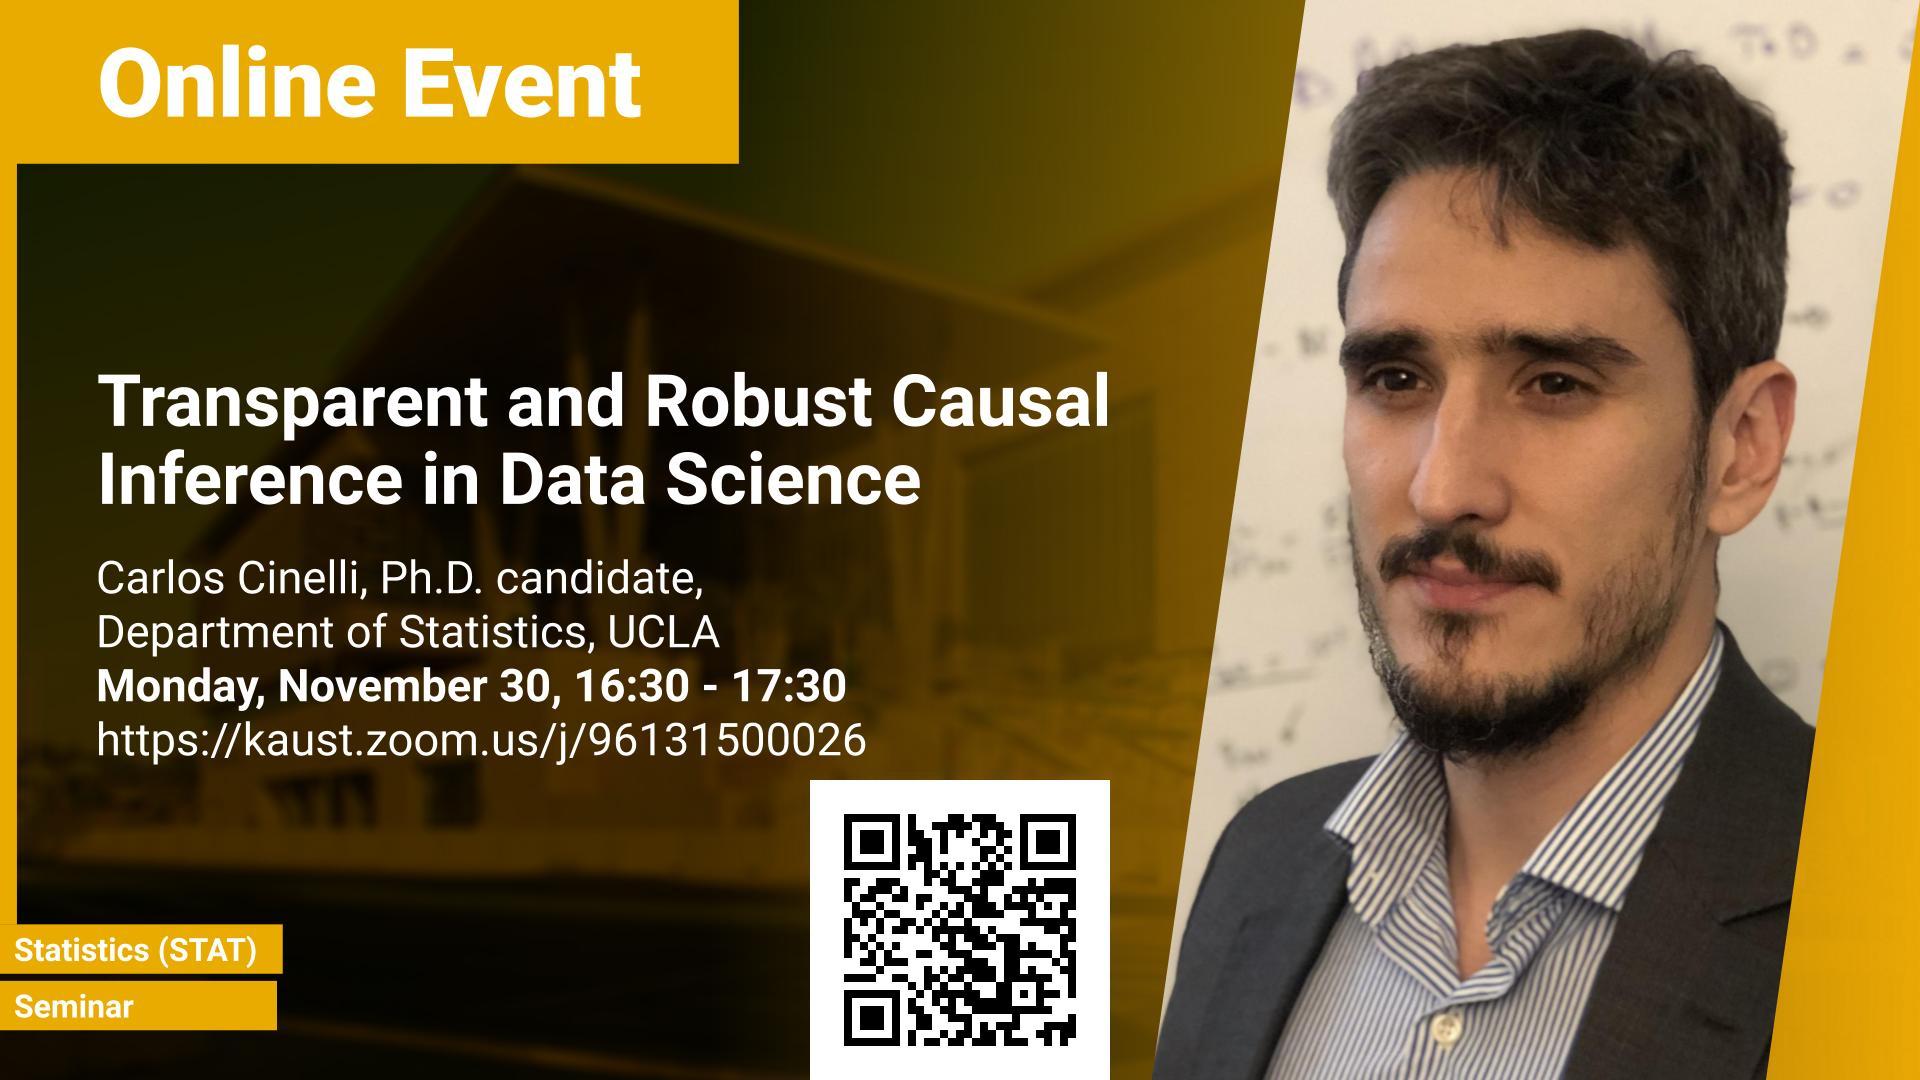 KAUST CEMSE STAT Seminar Carlos Cinelli Transparent and Robust Causal Inference in Data Science.jpg